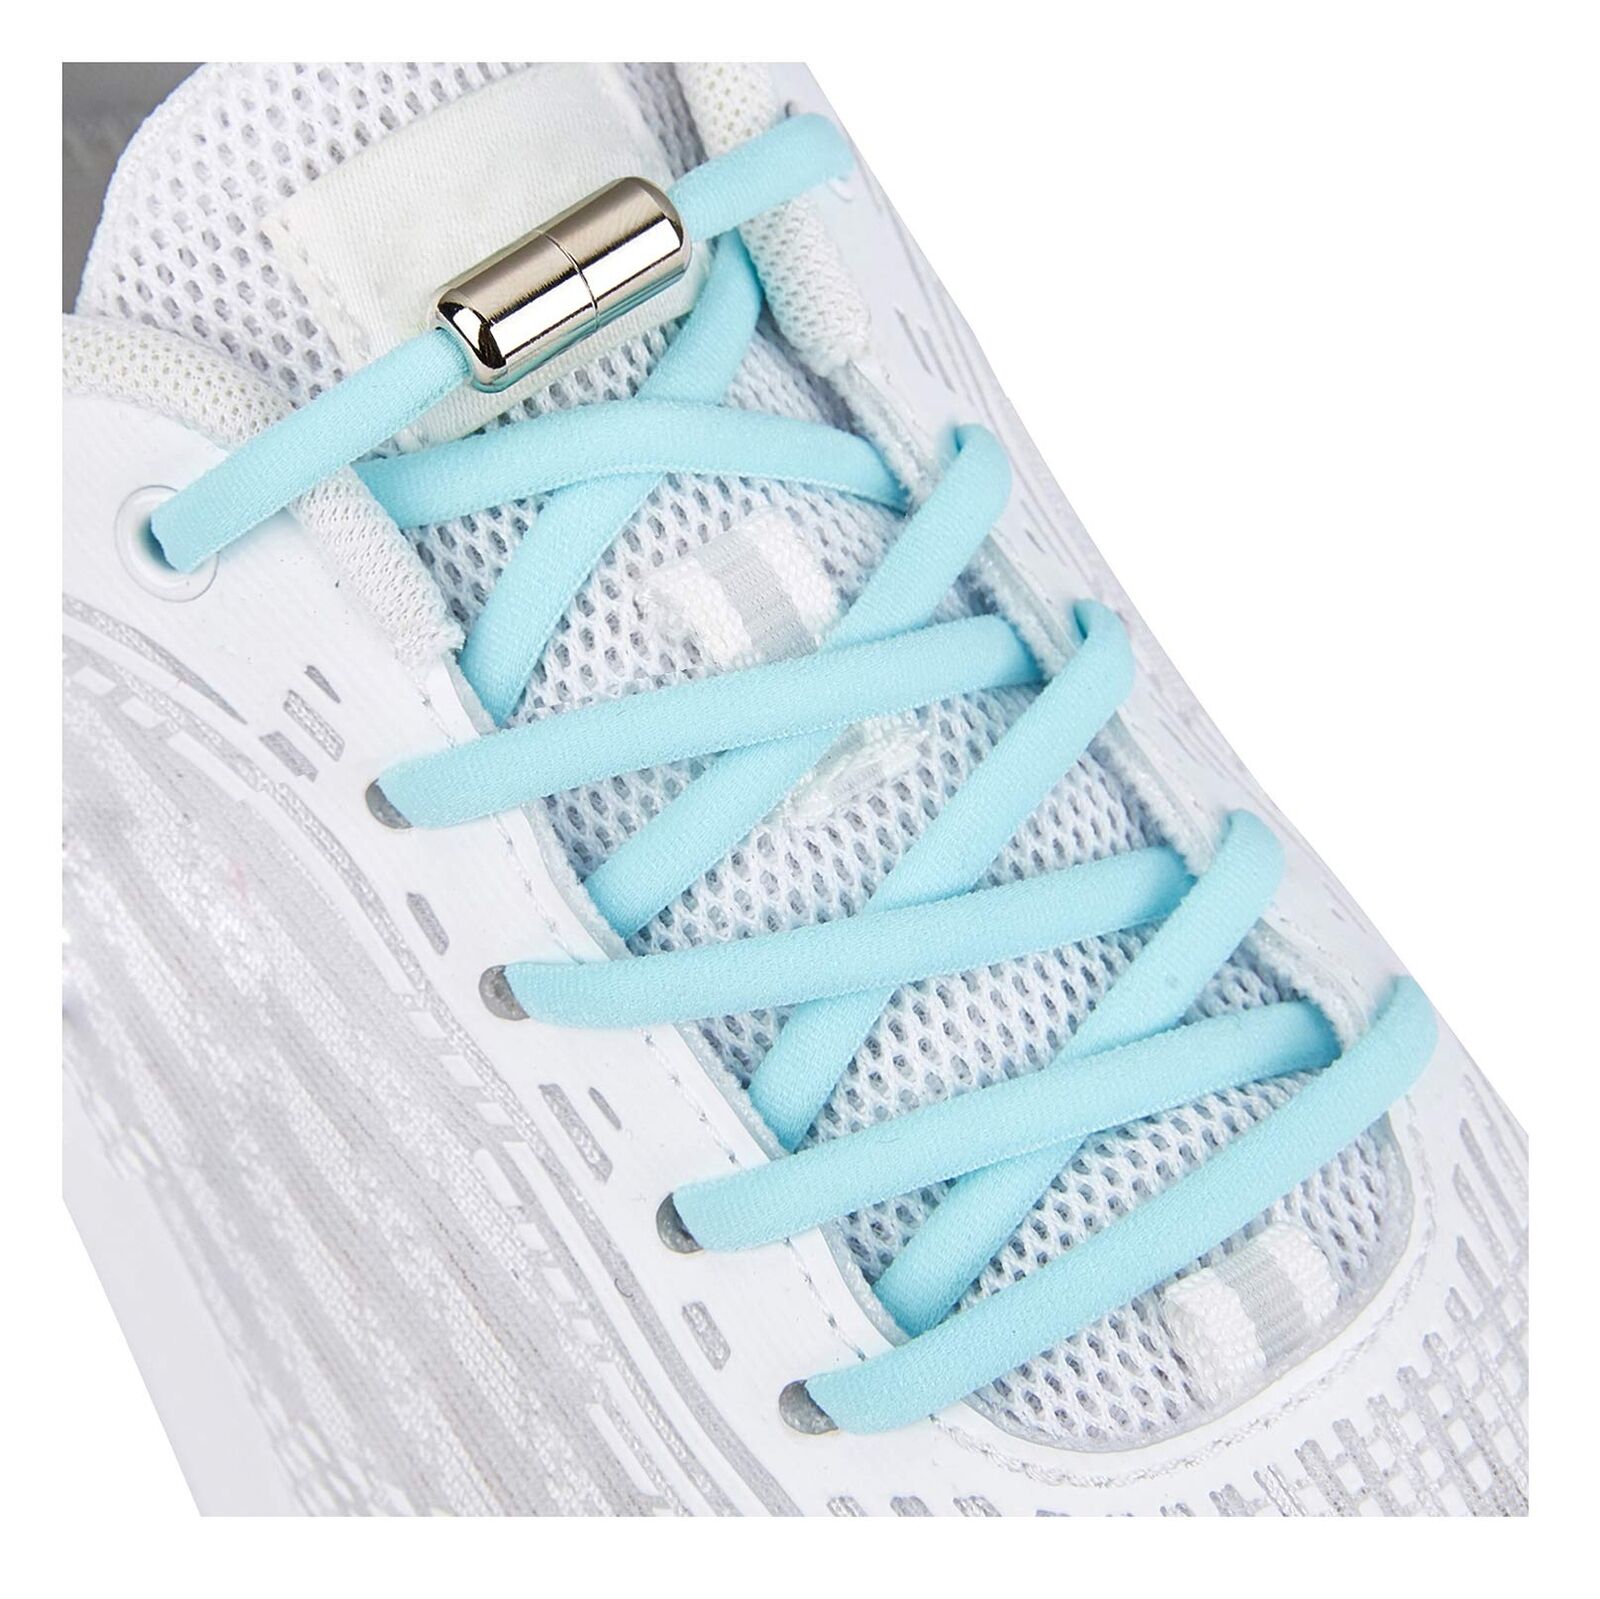 Clever Elastic Shoe Laces for Kids and Adults SneakersElastic No Tie Shoelaces Sky Blue on eBay